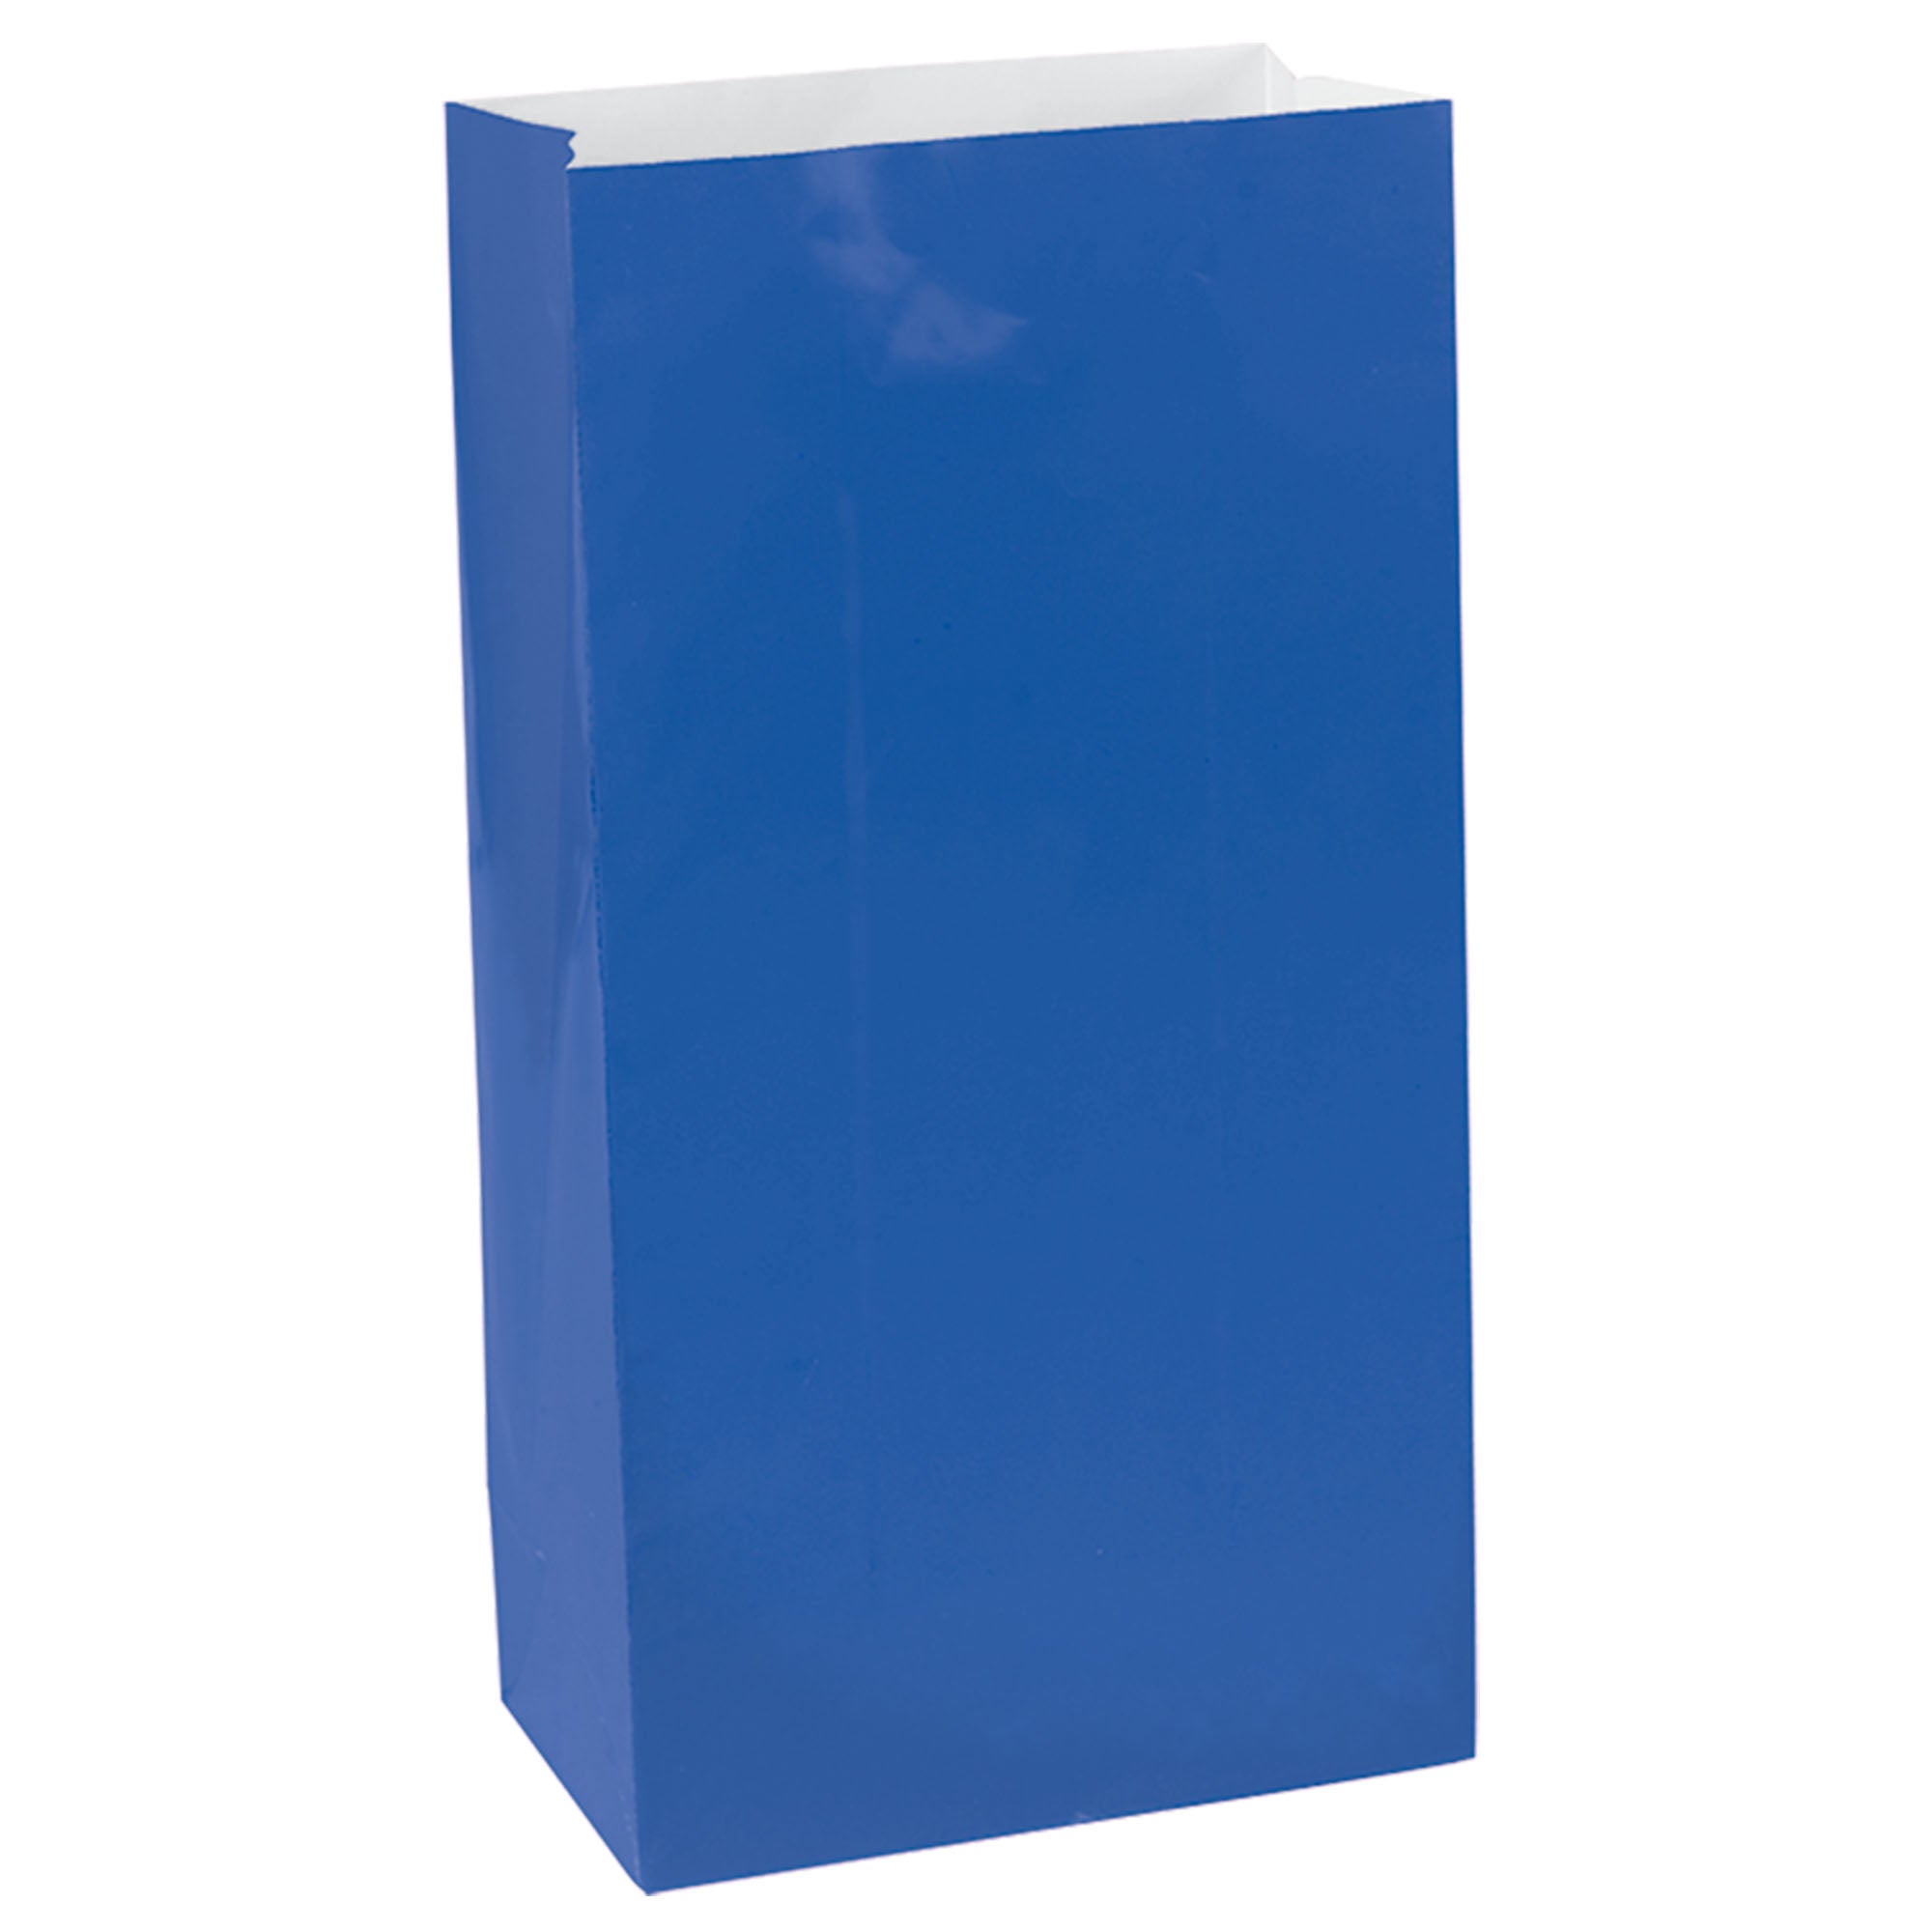 12 Mini Packaged Paper Bags  Royal Blue  6.5x3x2in